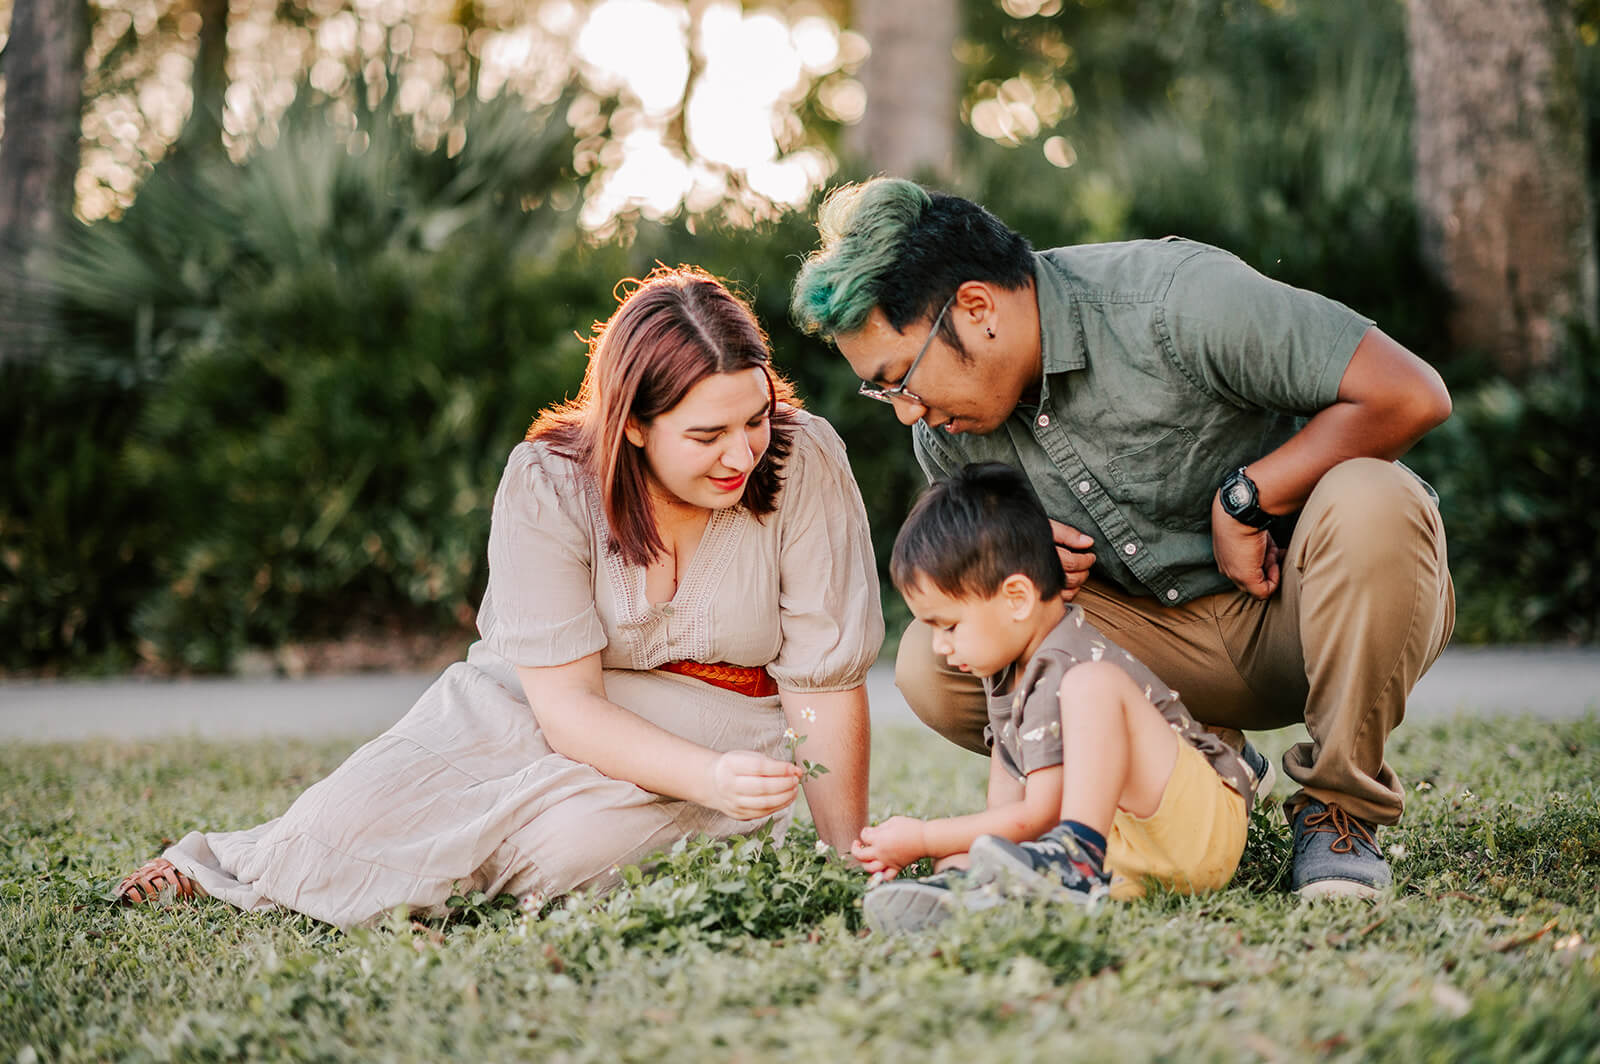 A mom and dad explore some wildflowers in a park lawn with their toddler son